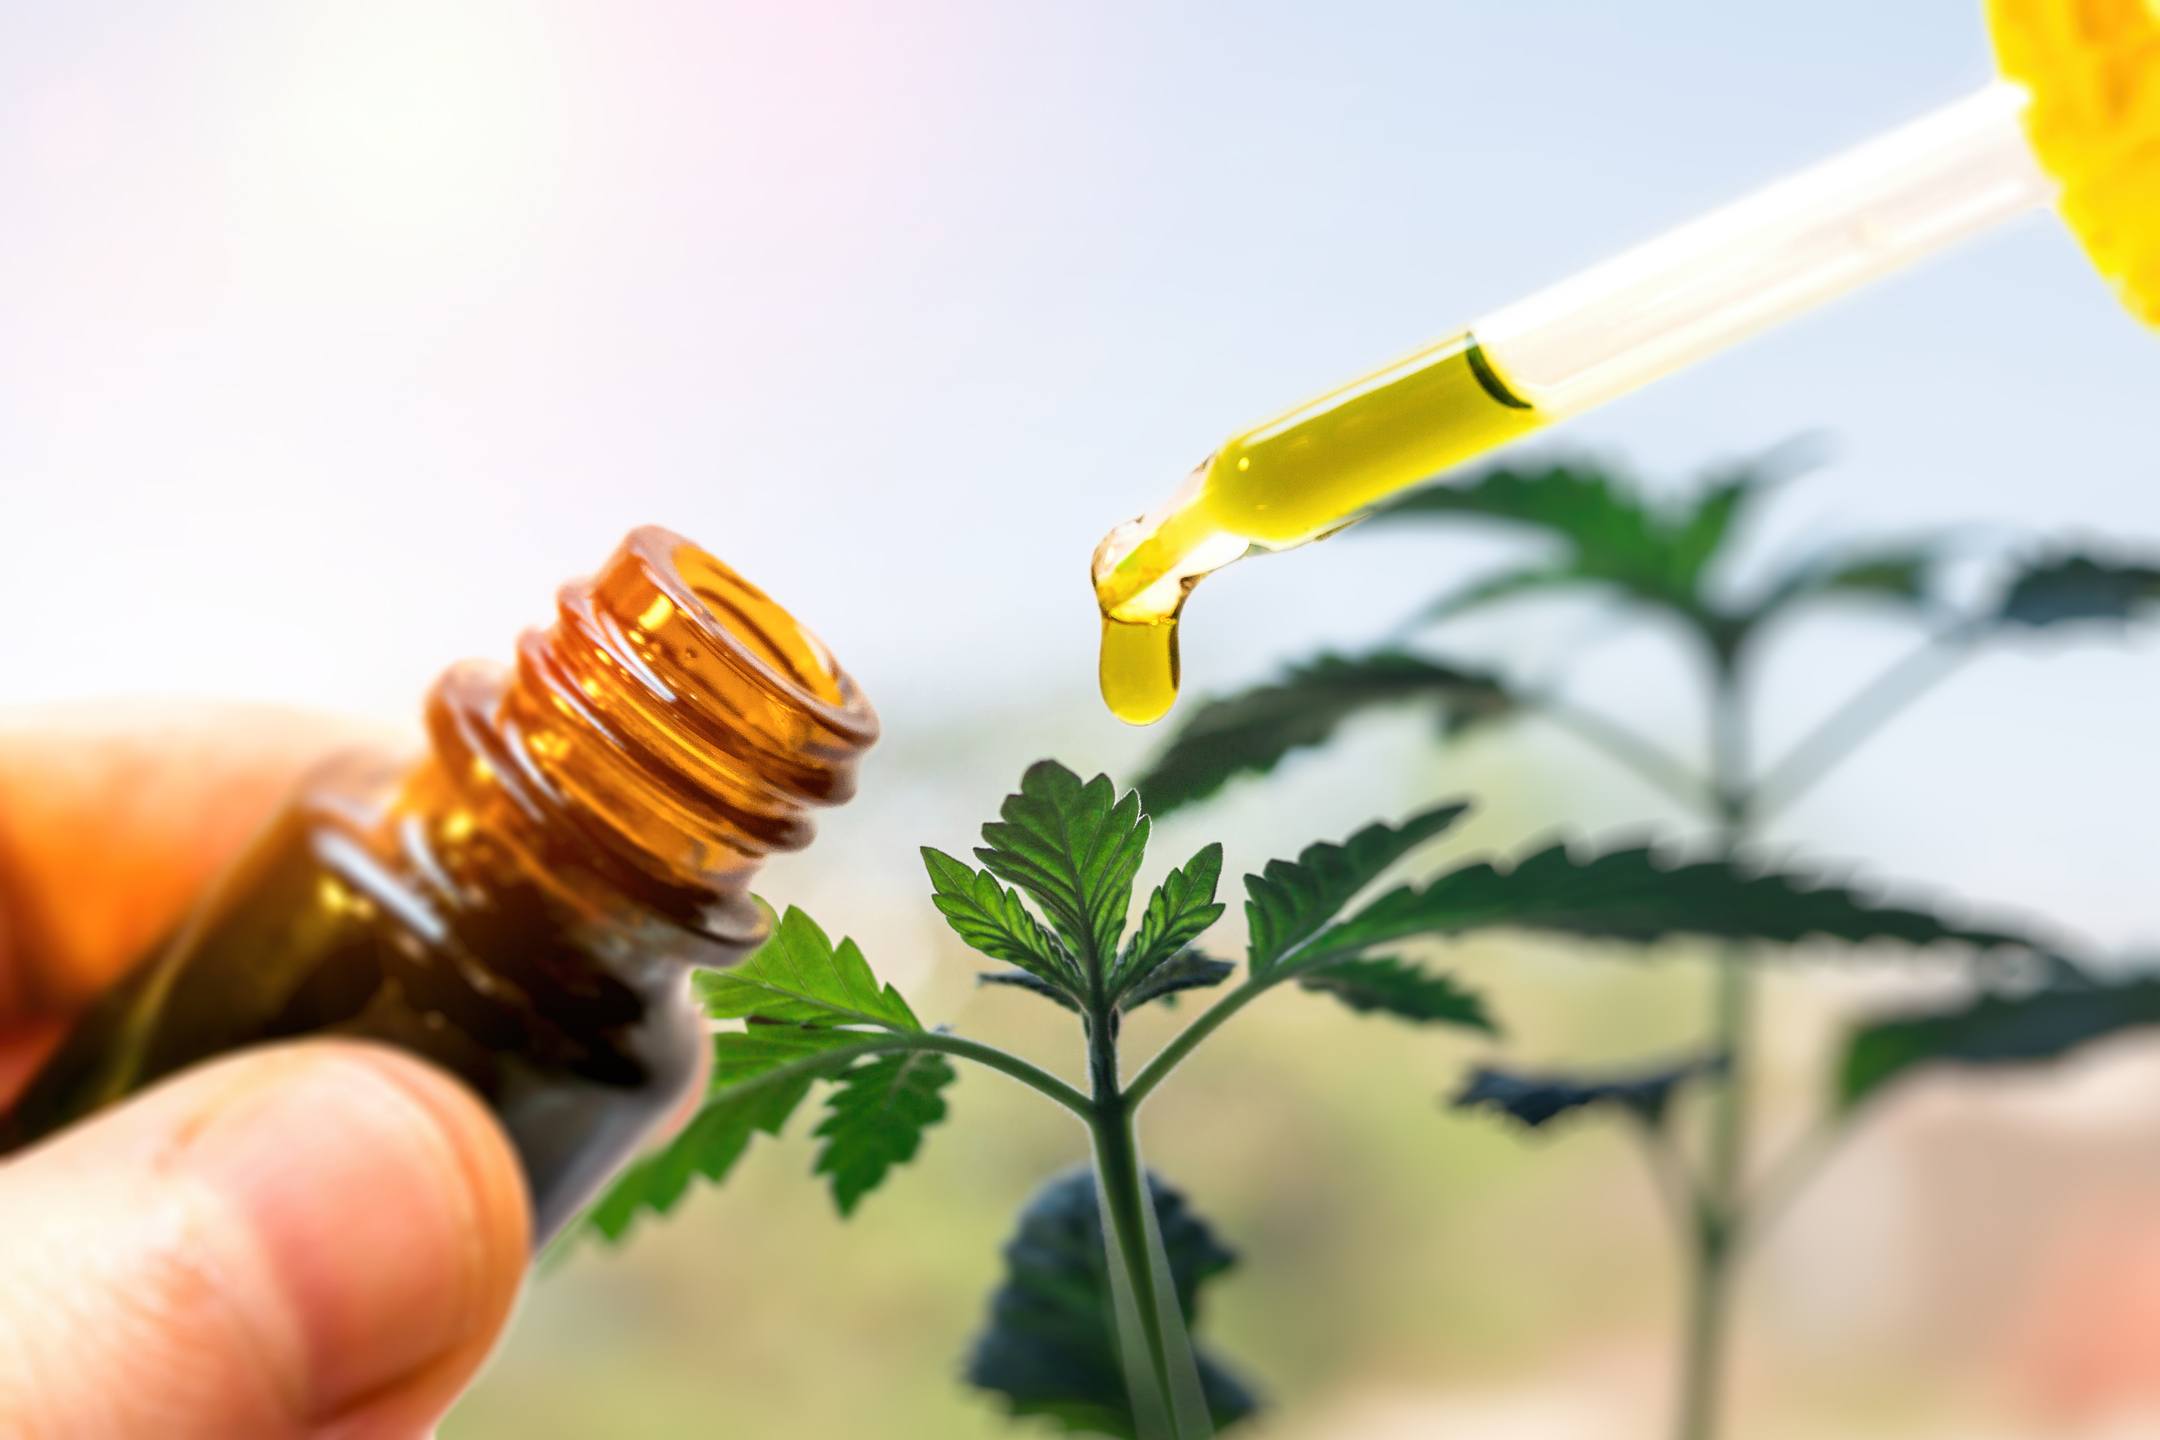 Numerous factors contribute to the high cost of CBD, including legal expenses, third-party lab testing, extraction, and more. Photo: Hands holding a brown glass bottle of CBD oil, and a dropper with a drop of CBD dripping out, against a background of green hemp plants.